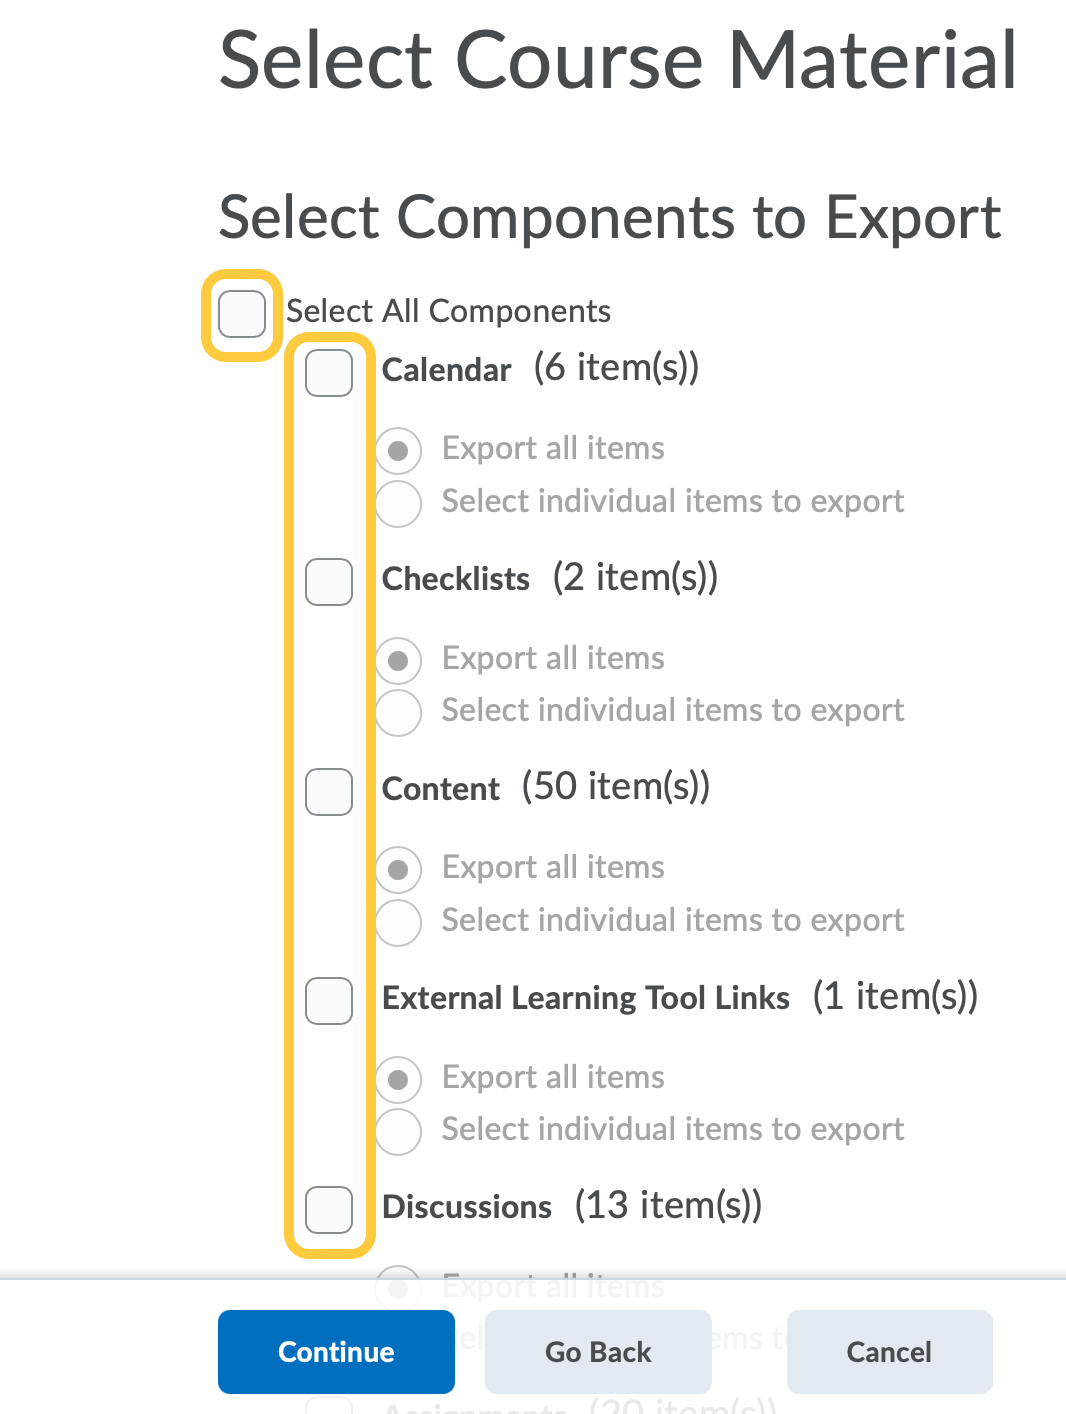 Select course material to export